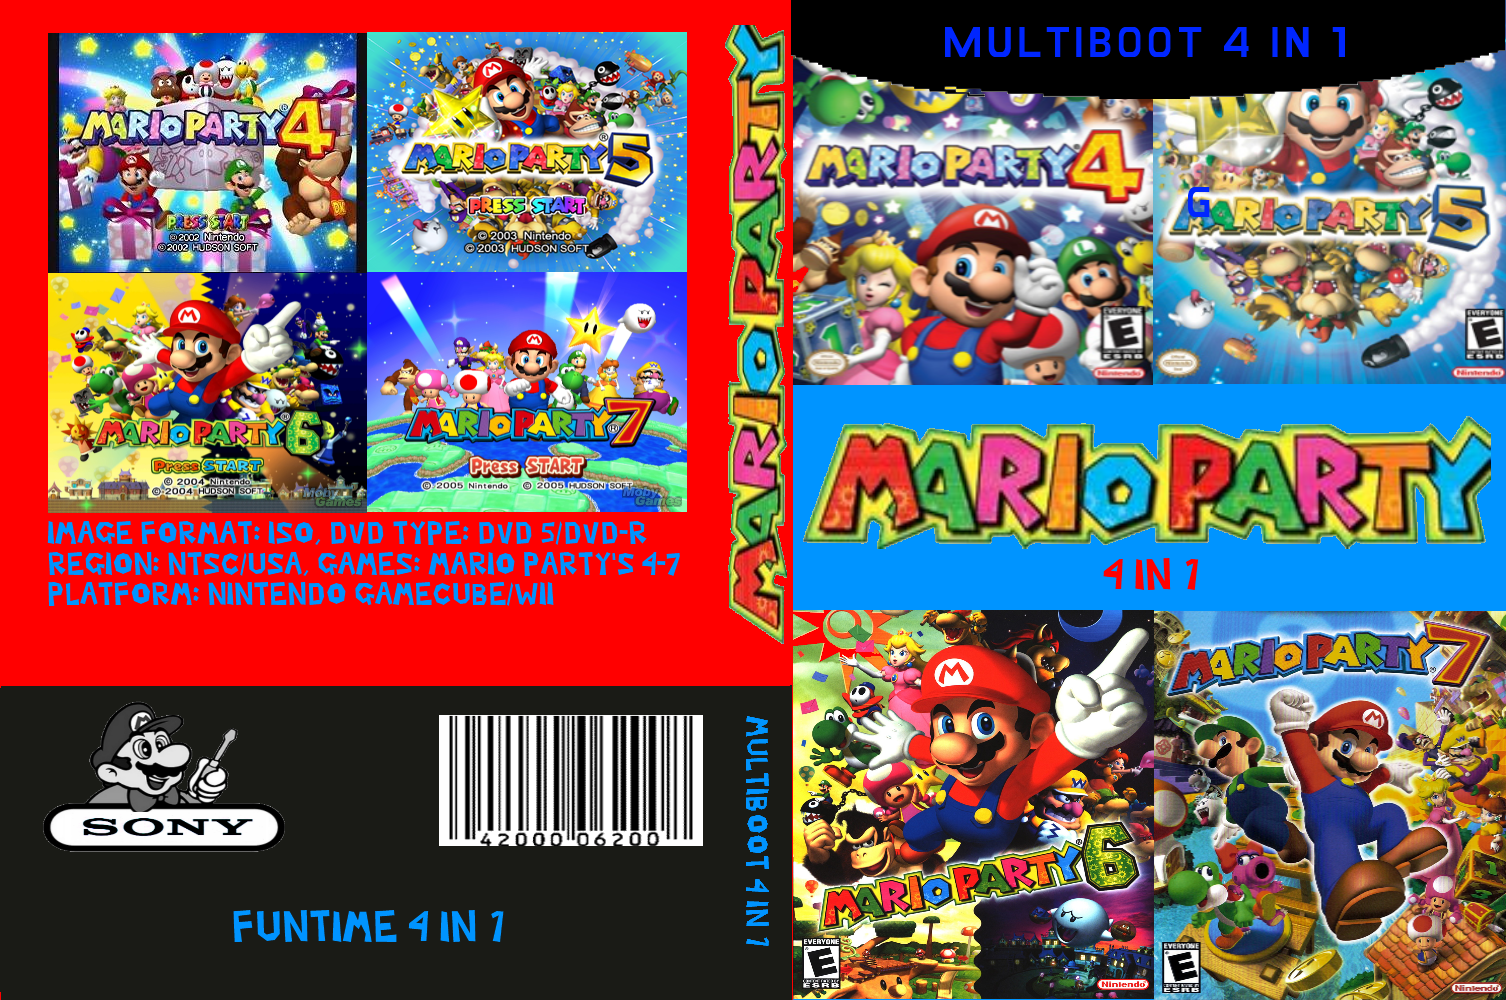 Mario Party 4 In 1 box cover